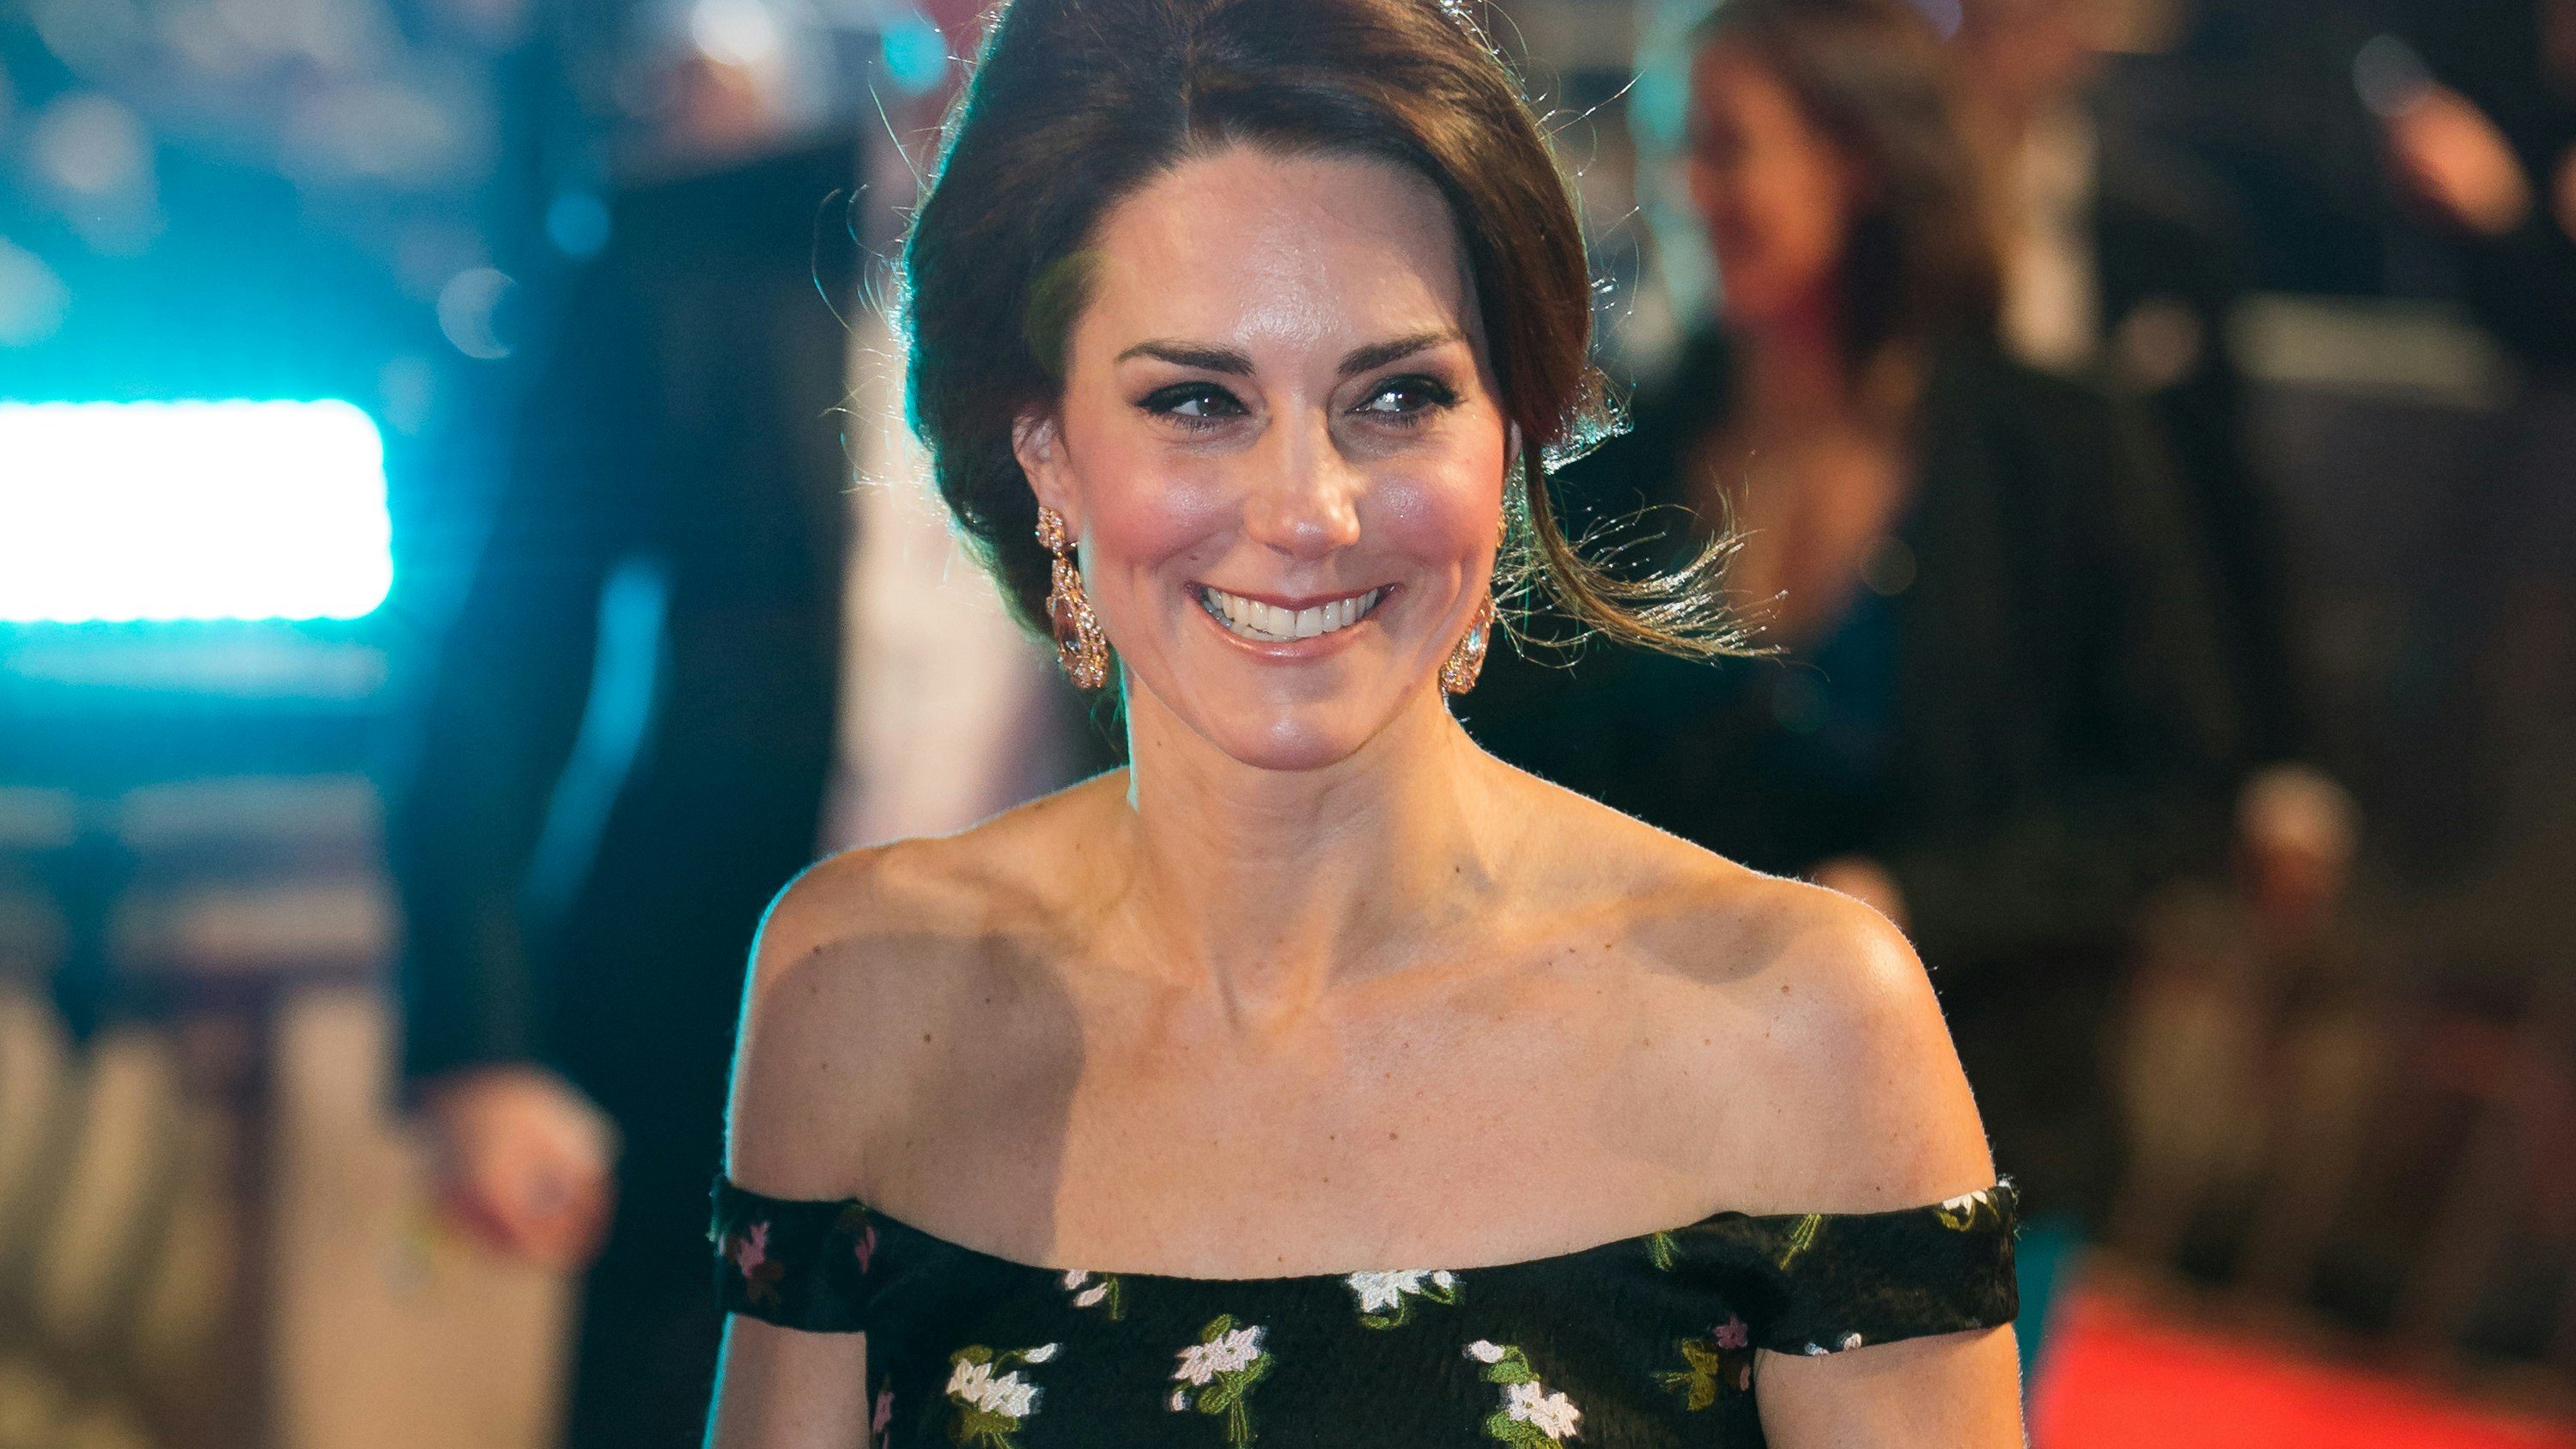 Baftas 2020: Kate Middleton champions sustainability by re-wearing